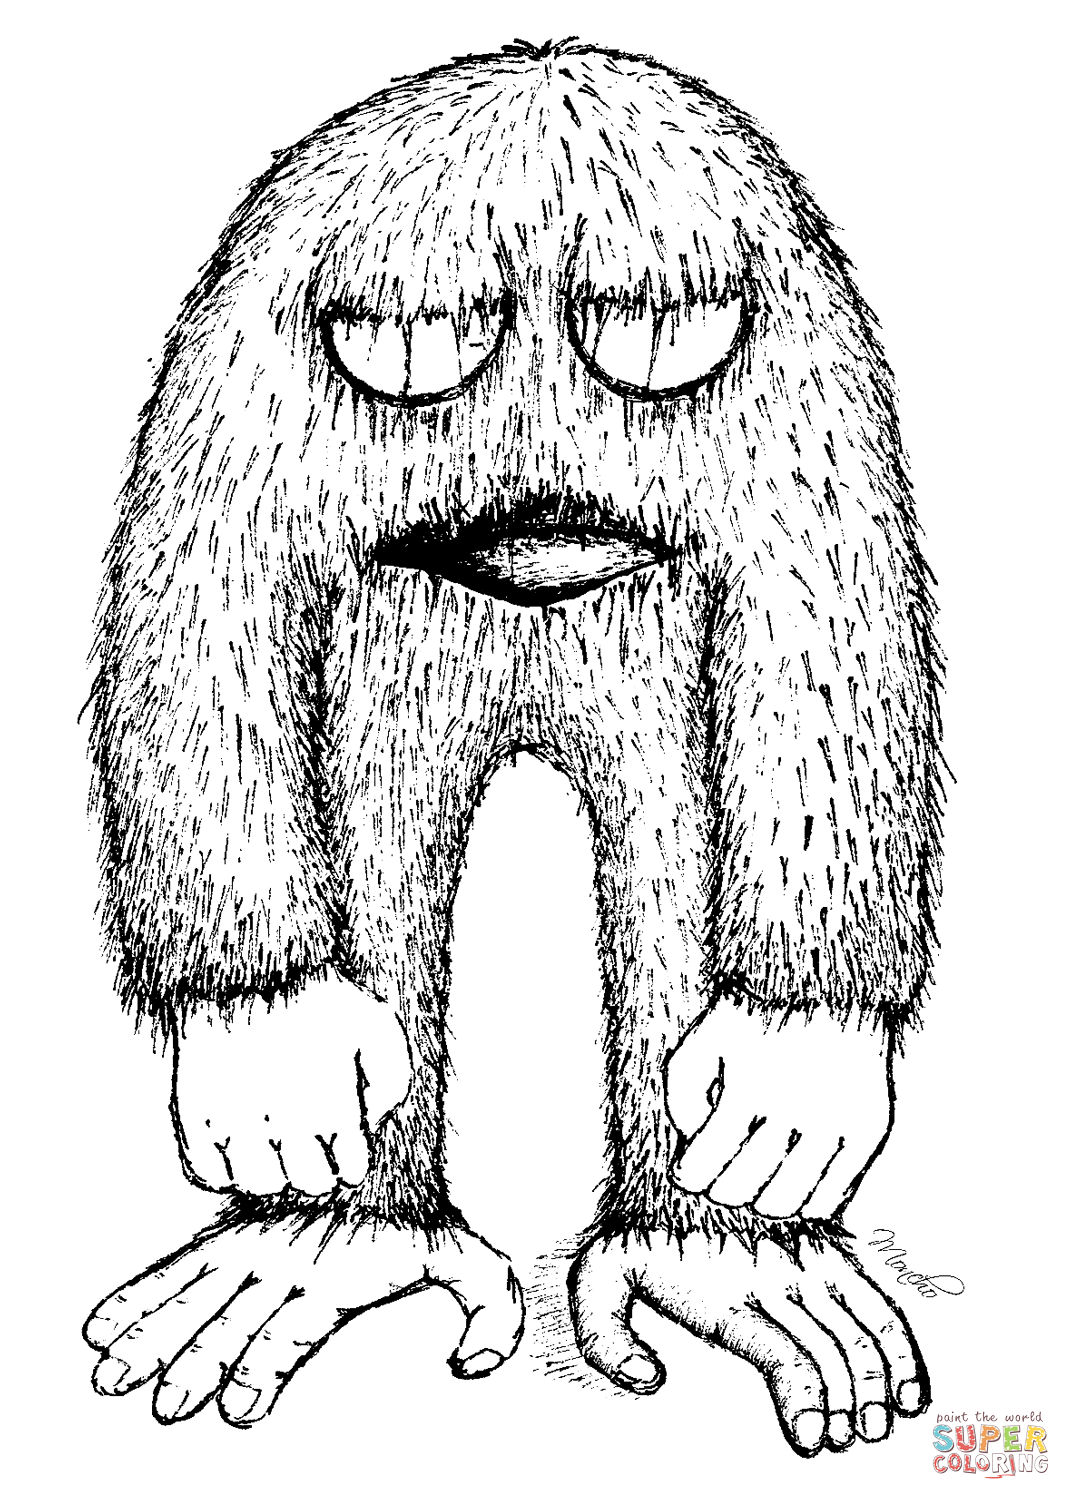 Coloring Pages : Excelent Bigfoot Coloring Pages Bigfoot Coloring Pages  Free Printable‚ Printable Bigfoot Coloring Pages‚ Bigfoot Coloring Pages  For Kids along with Coloring Pagess